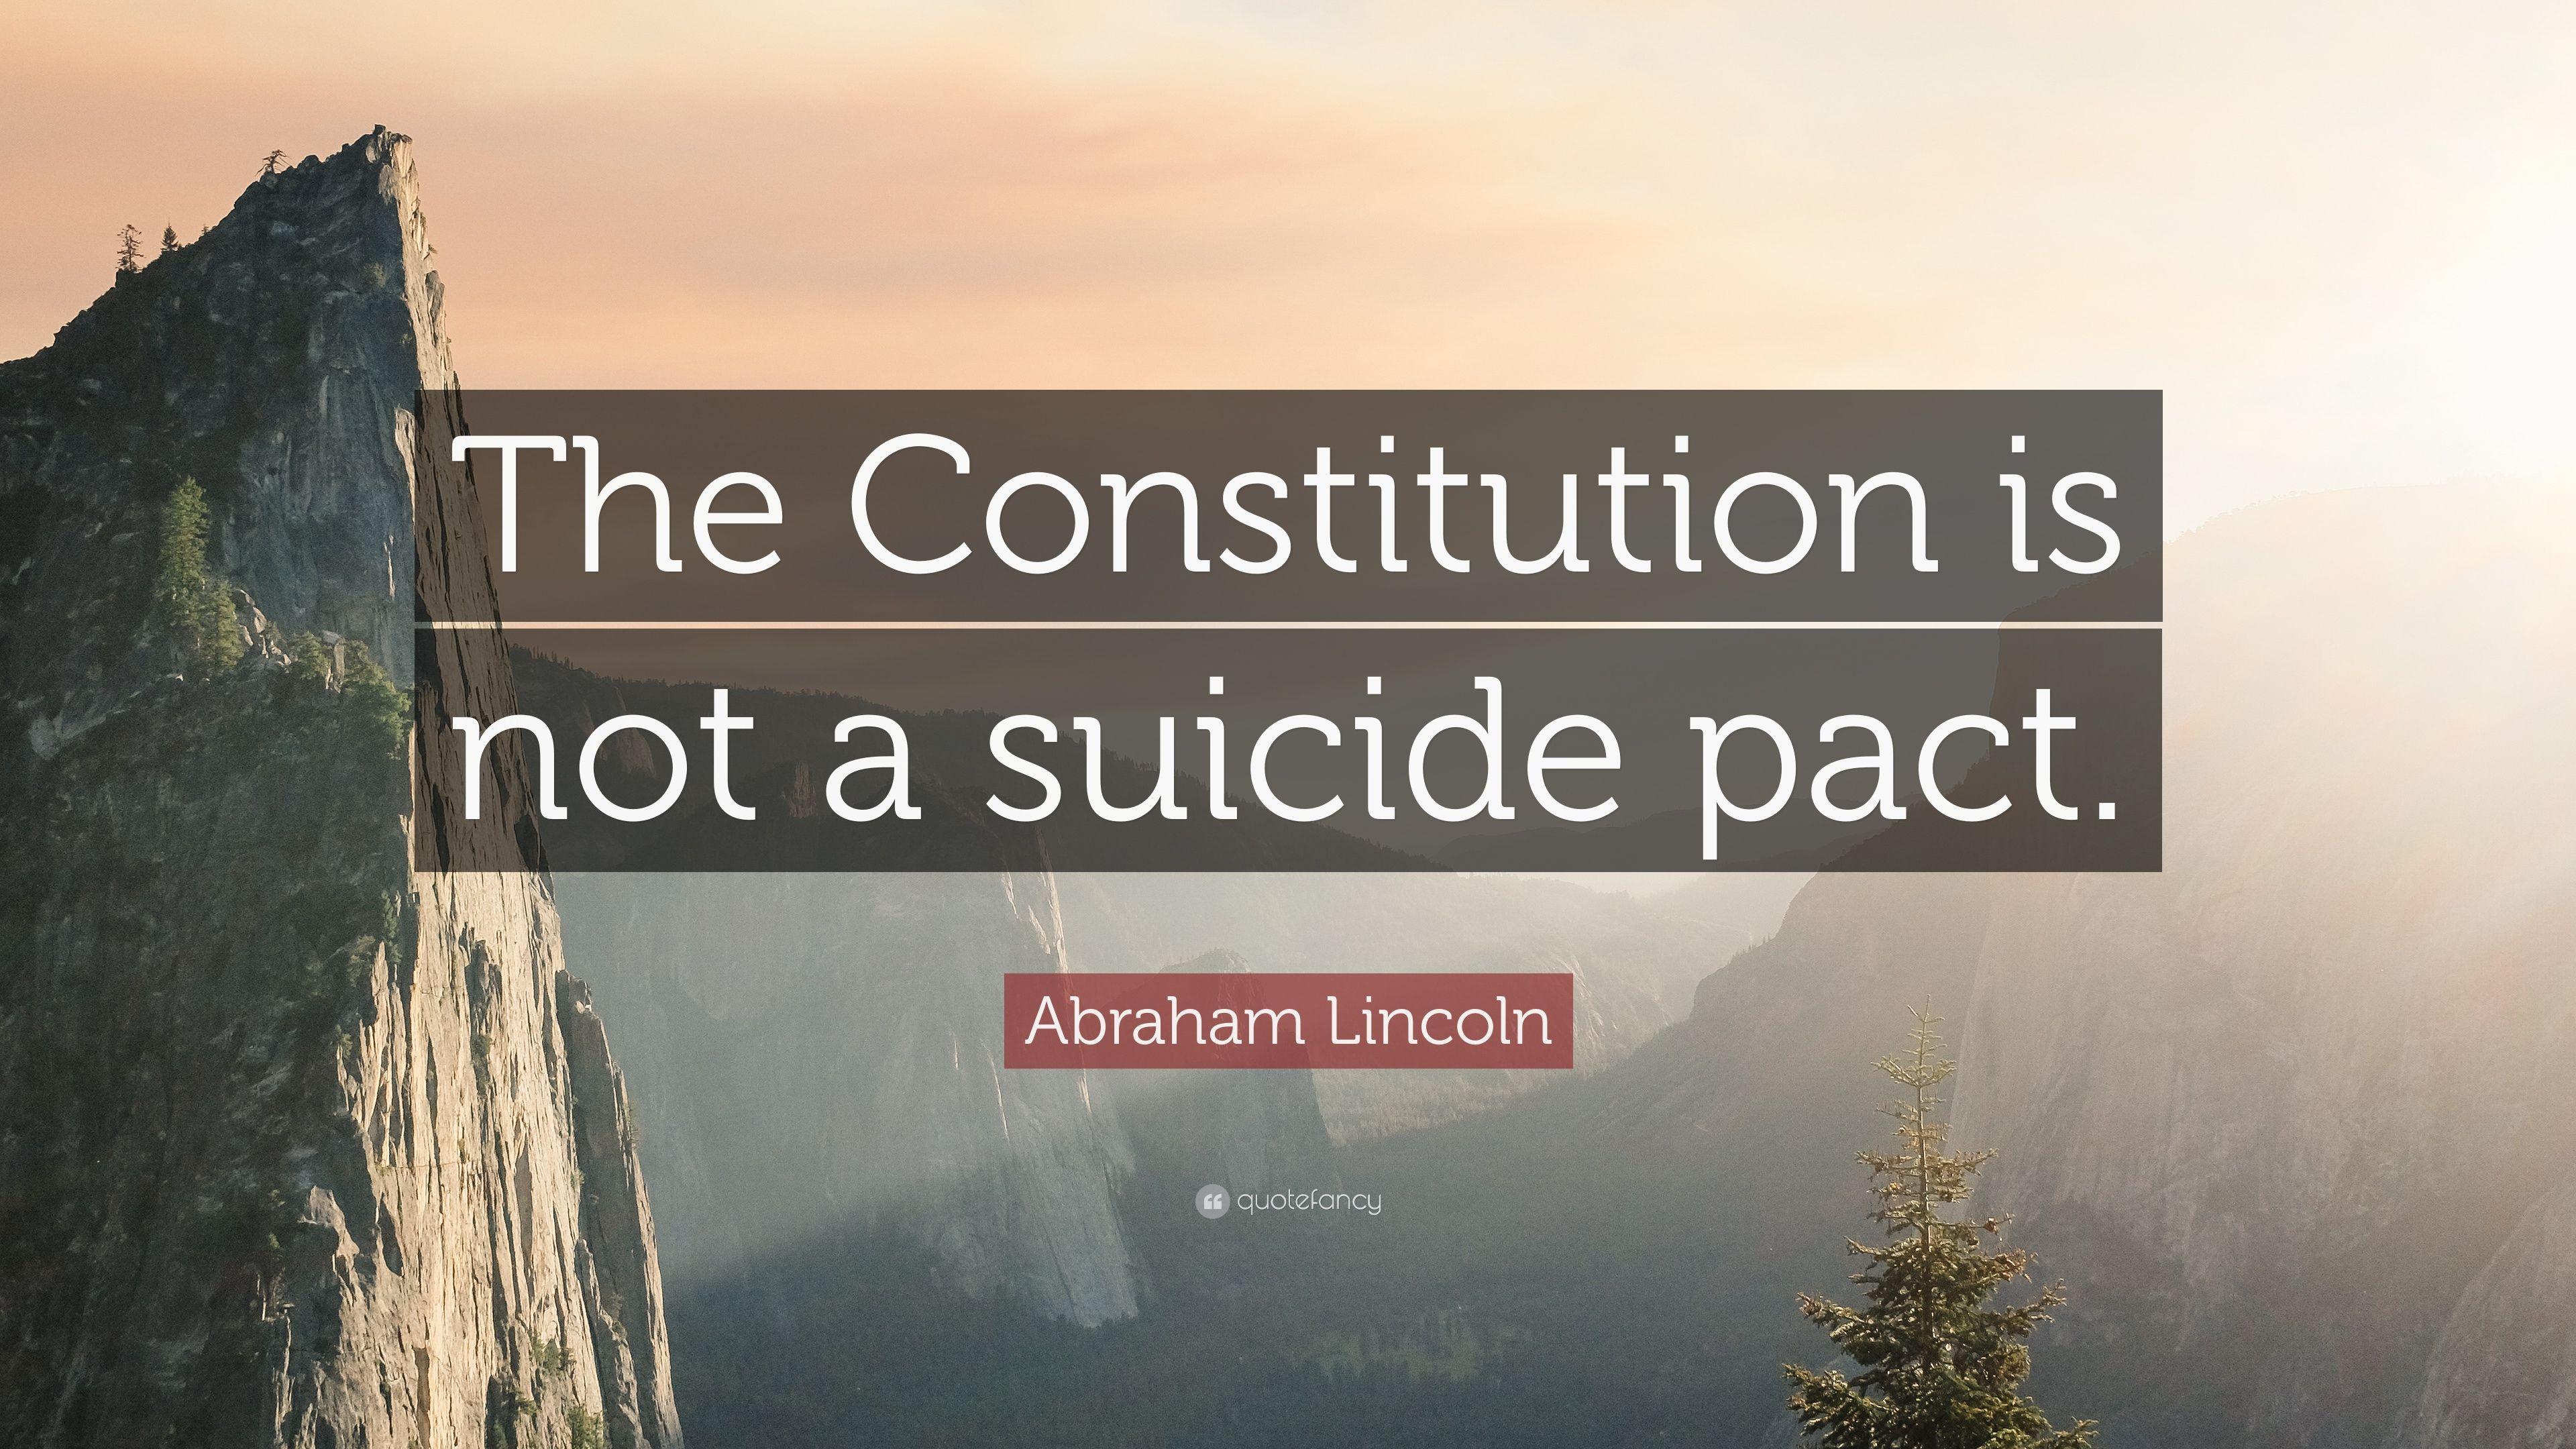 Abraham Lincoln Quote: “The Constitution is not a suicide pact